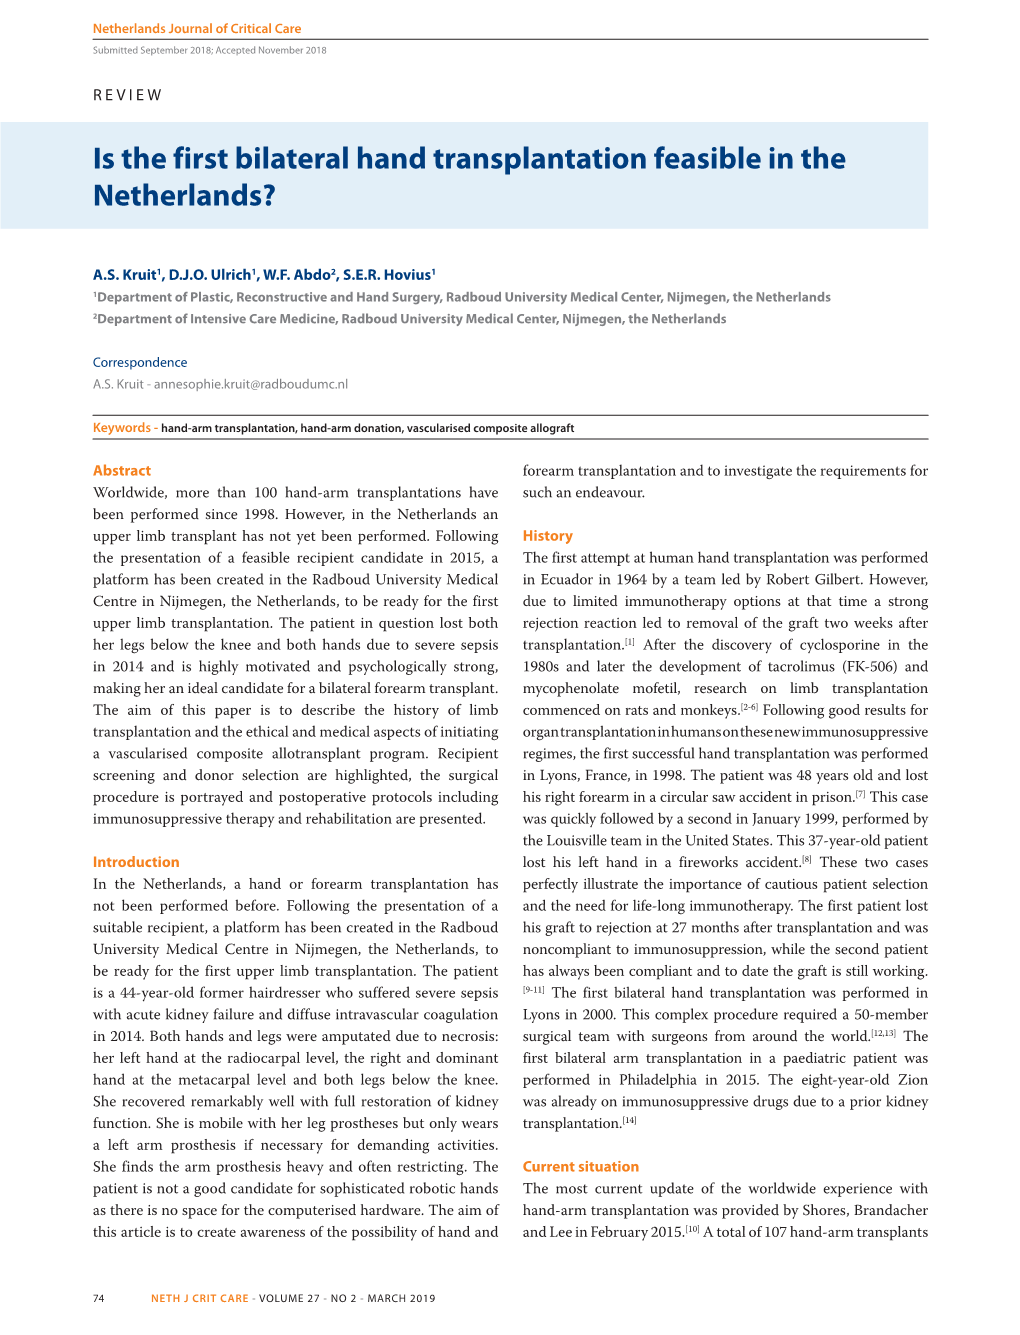 Is the First Bilateral Hand Transplantation Feasible in the Netherlands?